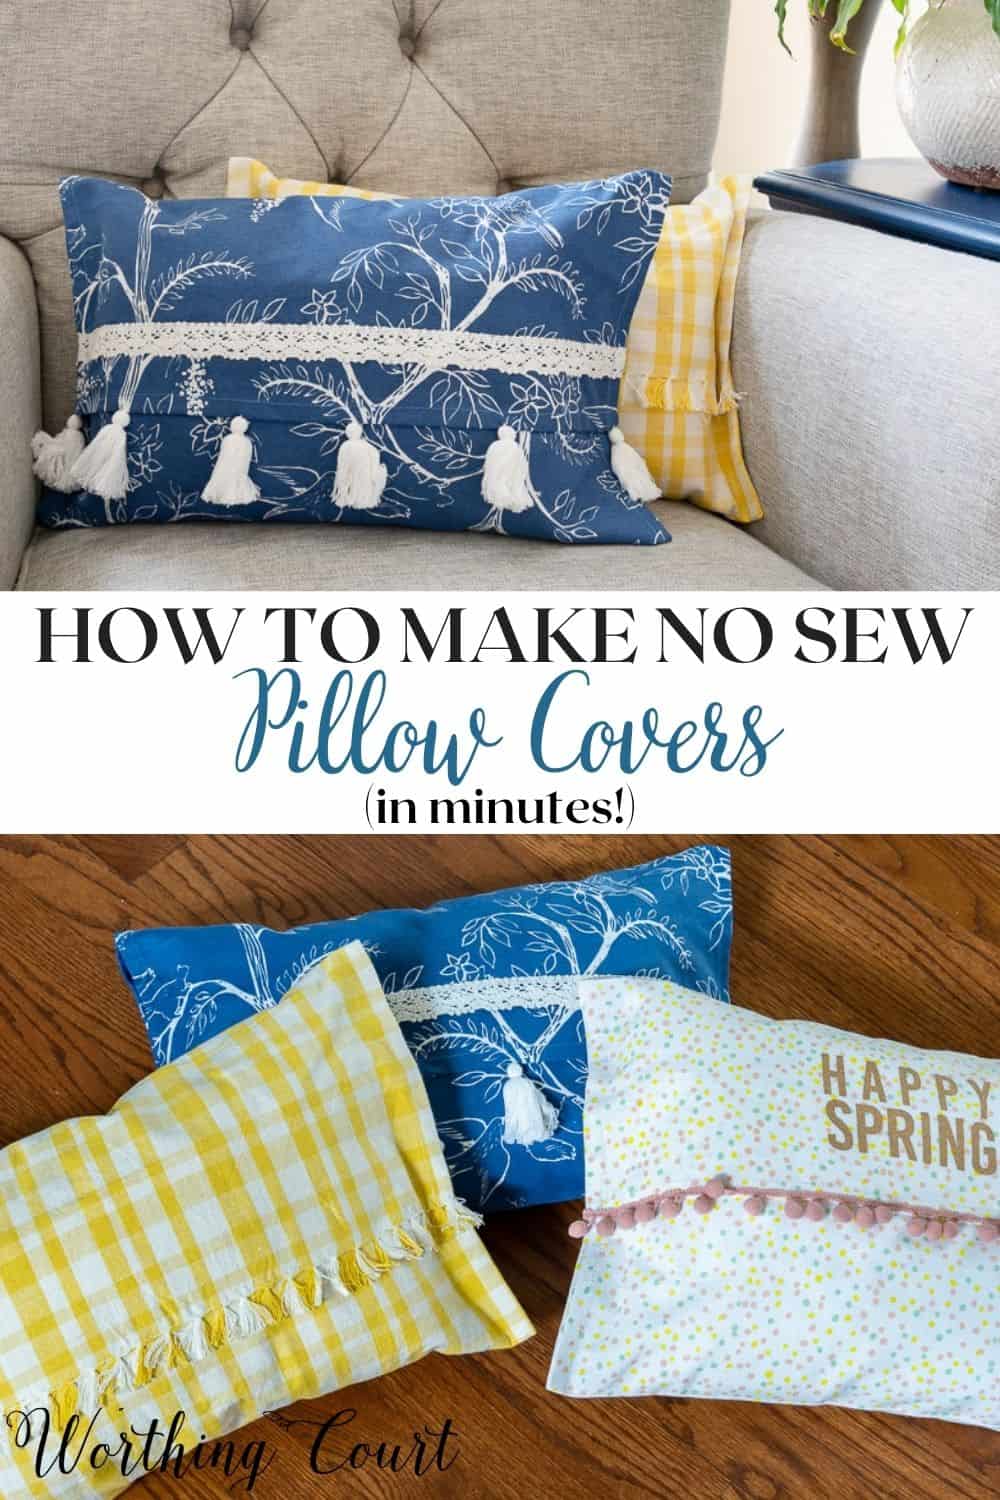 How To Make A No Sew Pillow Cover In Minutes